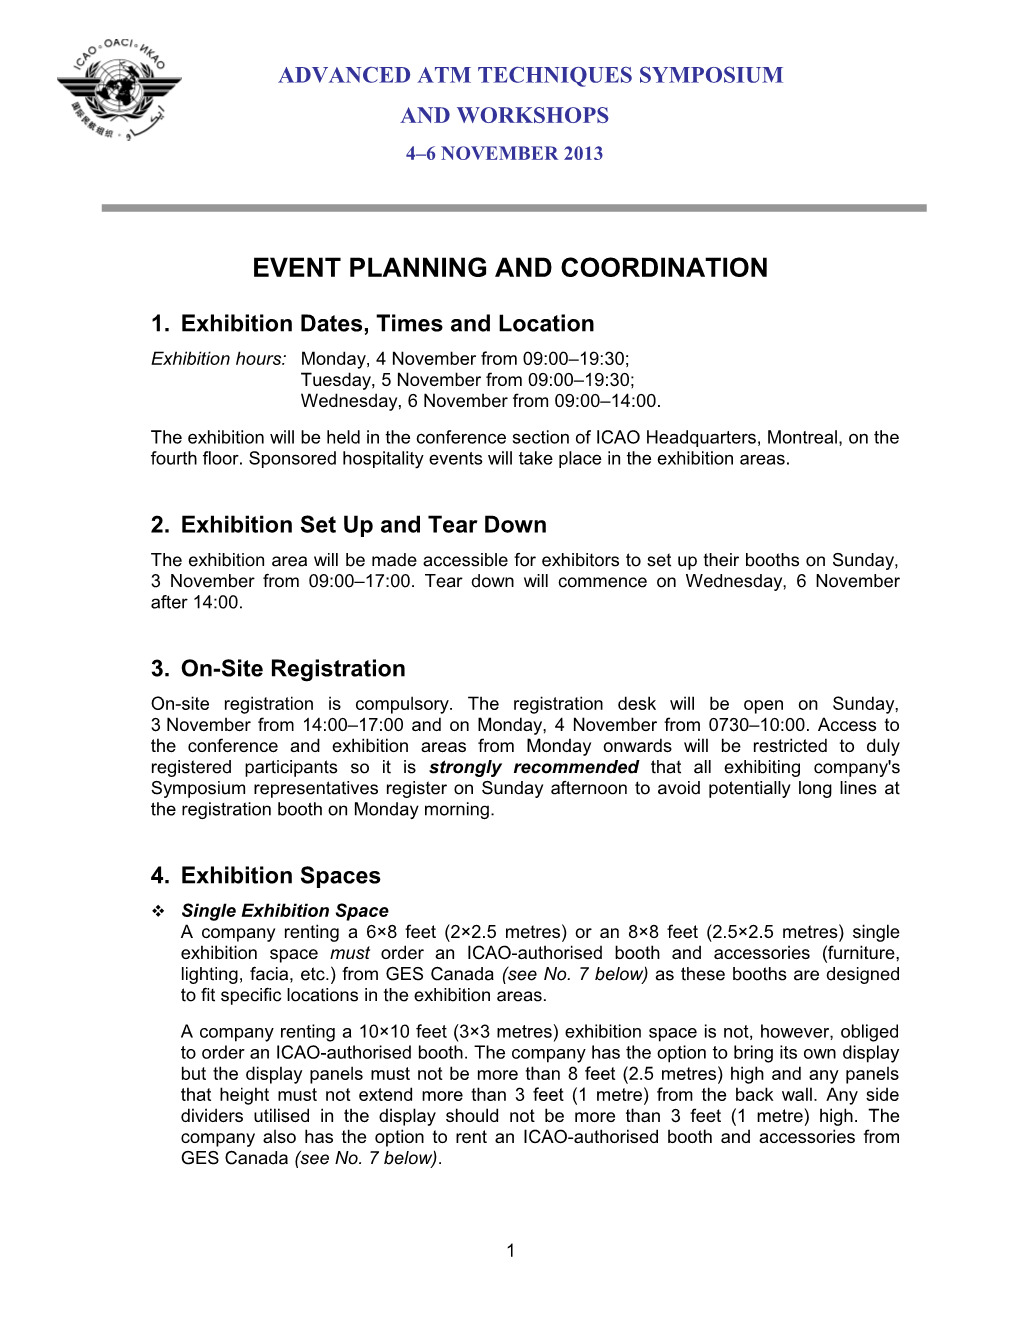 Event Planning and Coordination